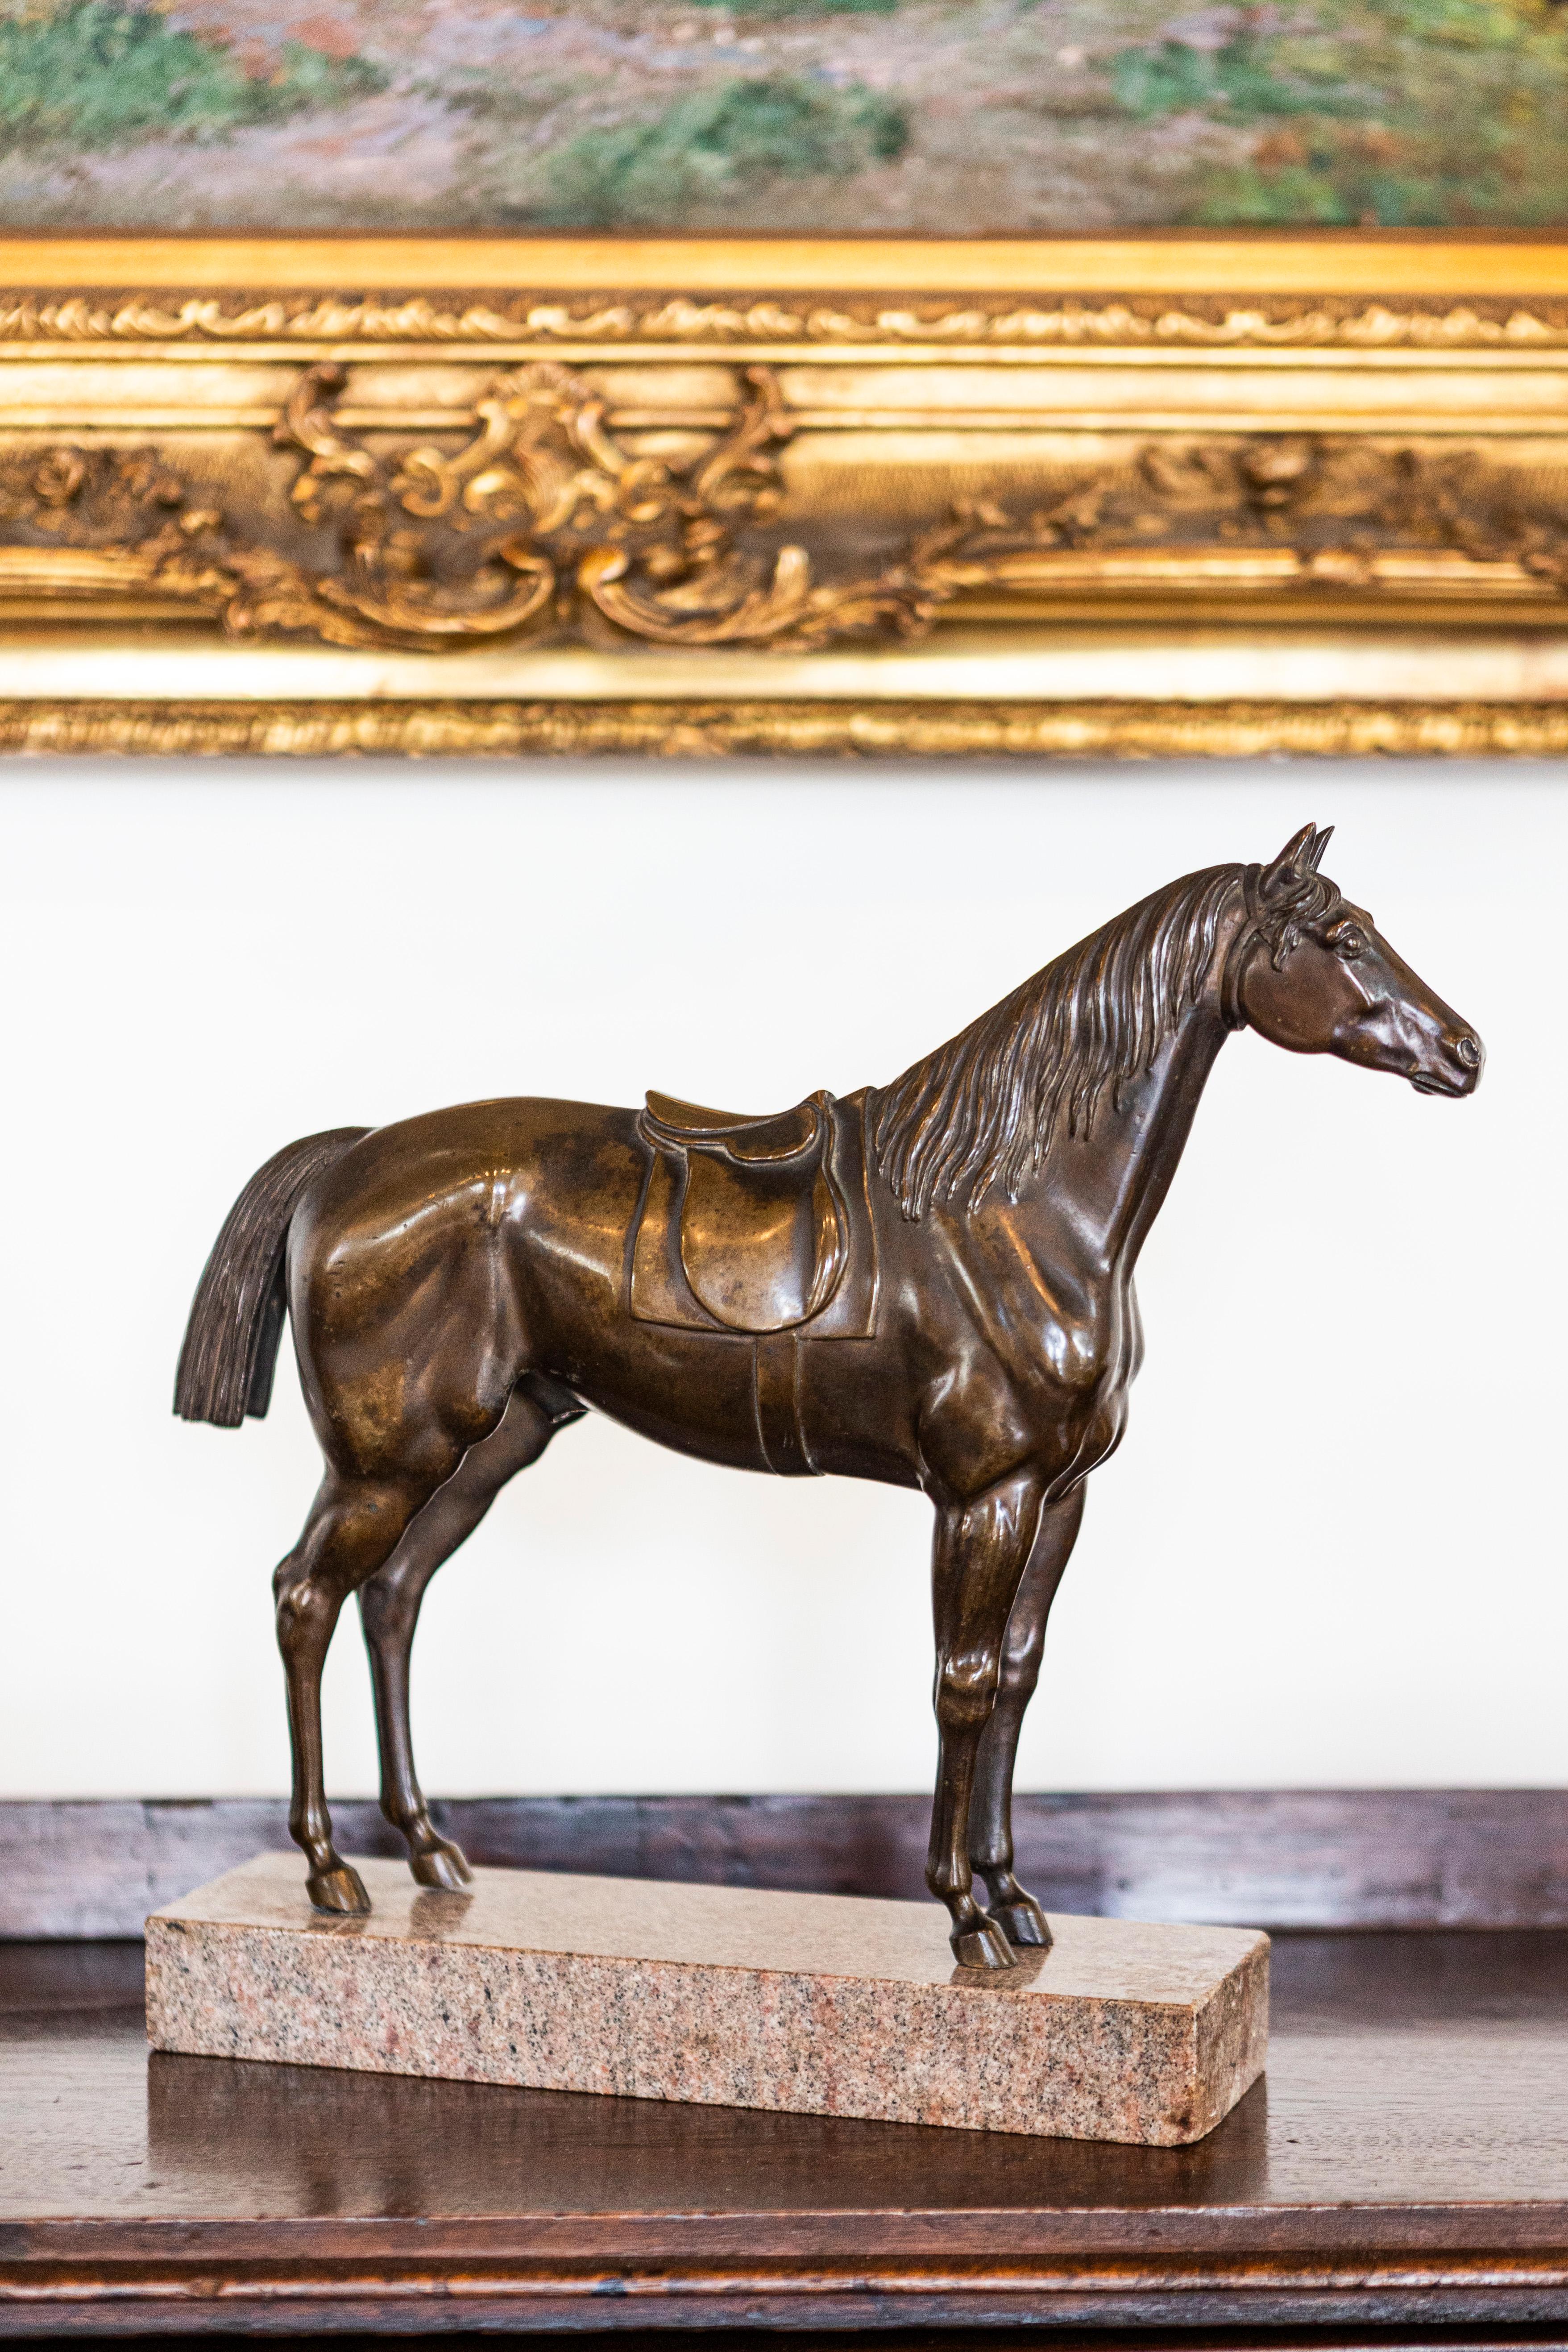 This exquisite French bronze horse statuette from the 20th century is an undeniable example of fine craftsmanship, prominently displayed on a sophisticated granite base. The statuette captures the majestic spirit of the horse, with its musculature